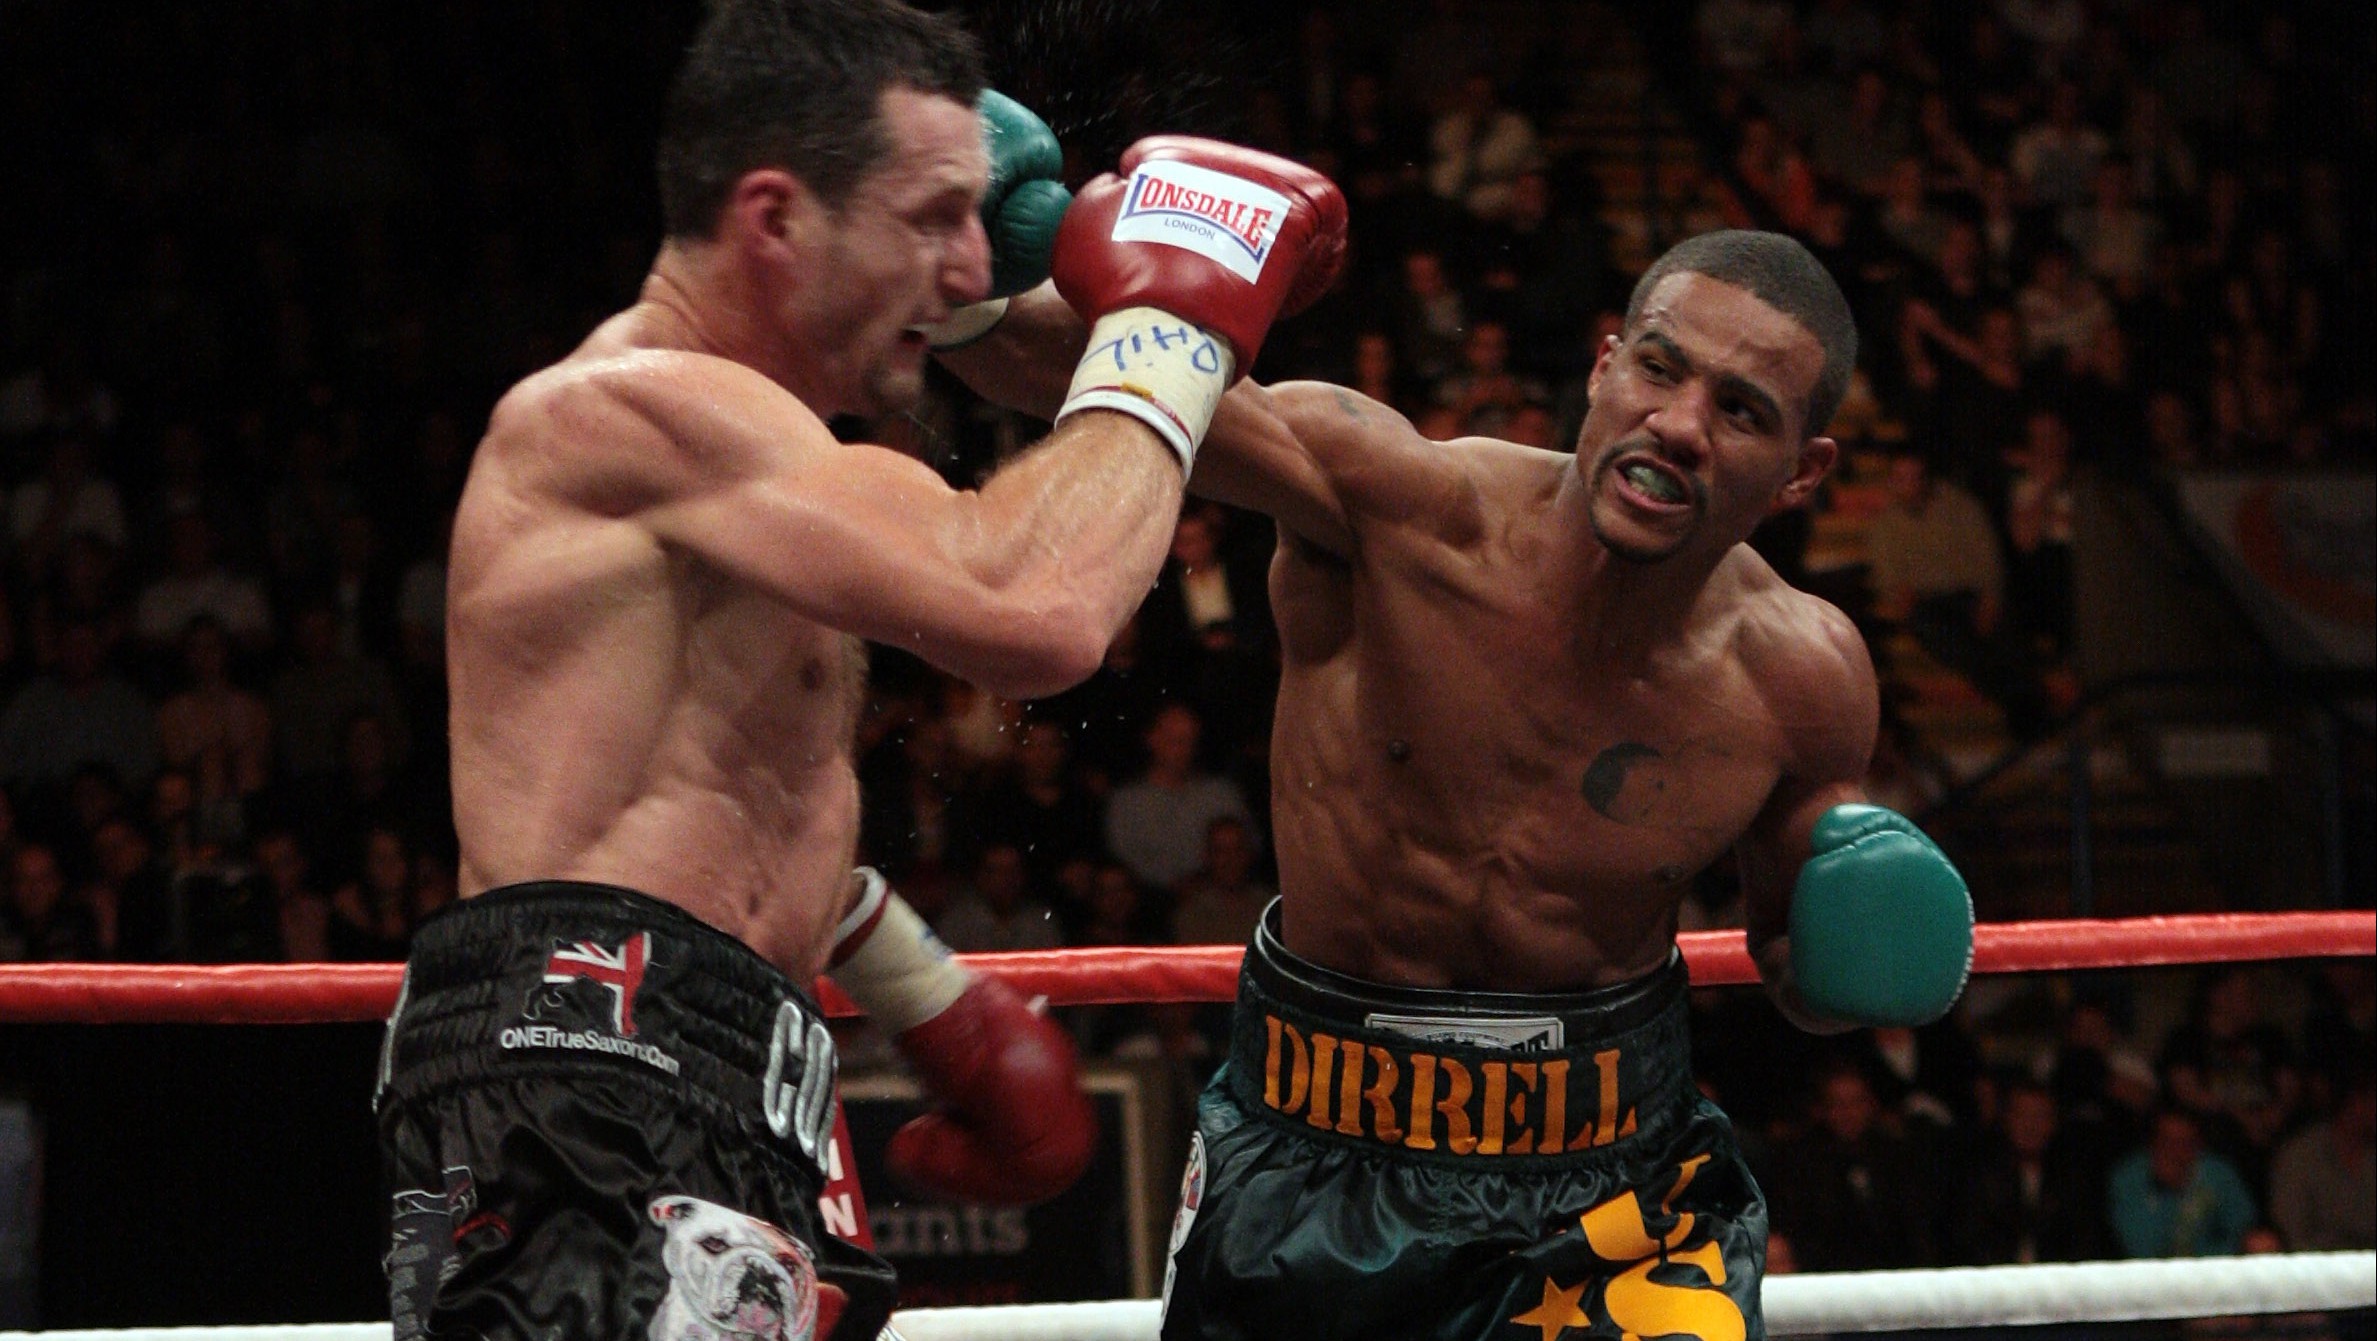 Andre Dirrell lands a right hand on Carl Froch during their WBC Super Middleweight fight on October 17, 2009. (Getty)